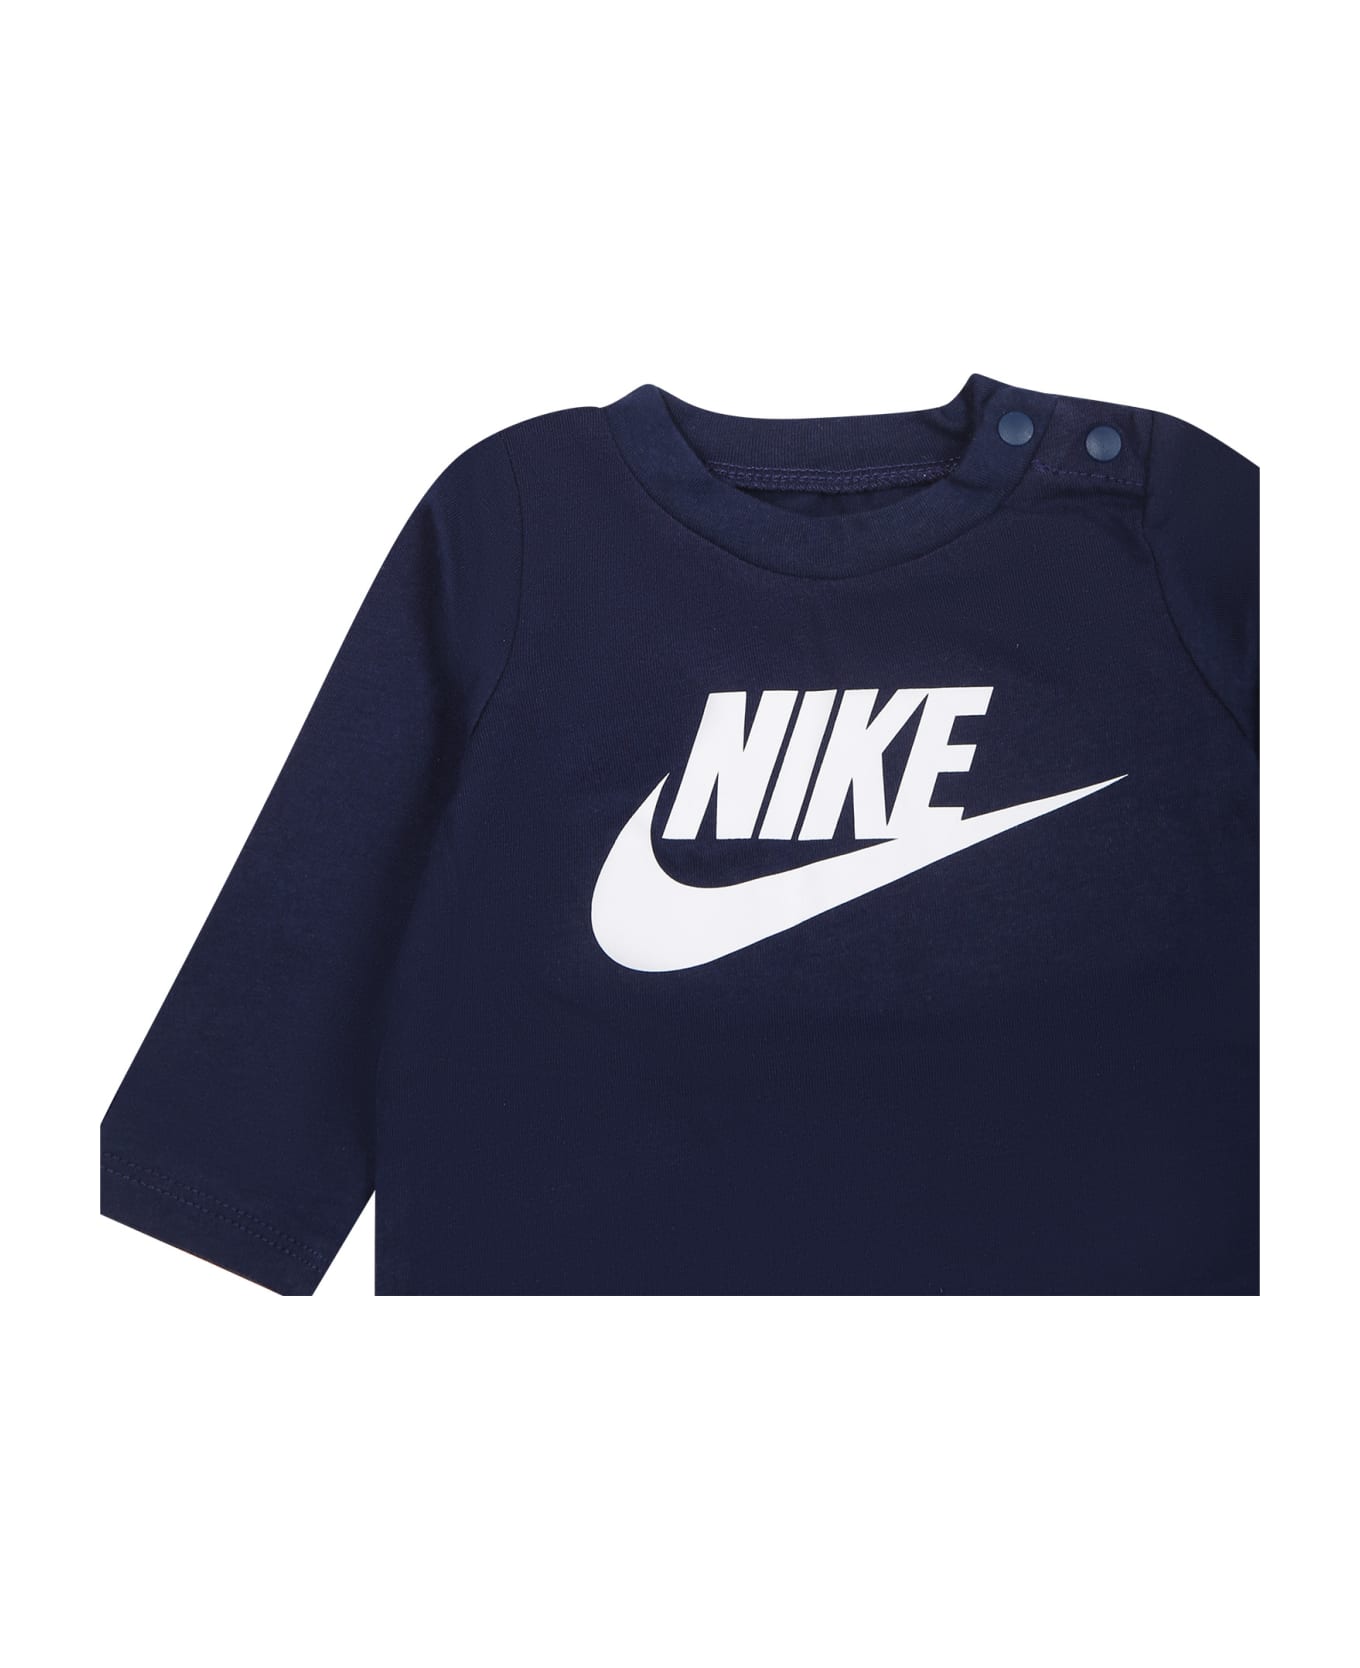 Nike Blue Babygrow For Baby Boy With Swoosh - Blue